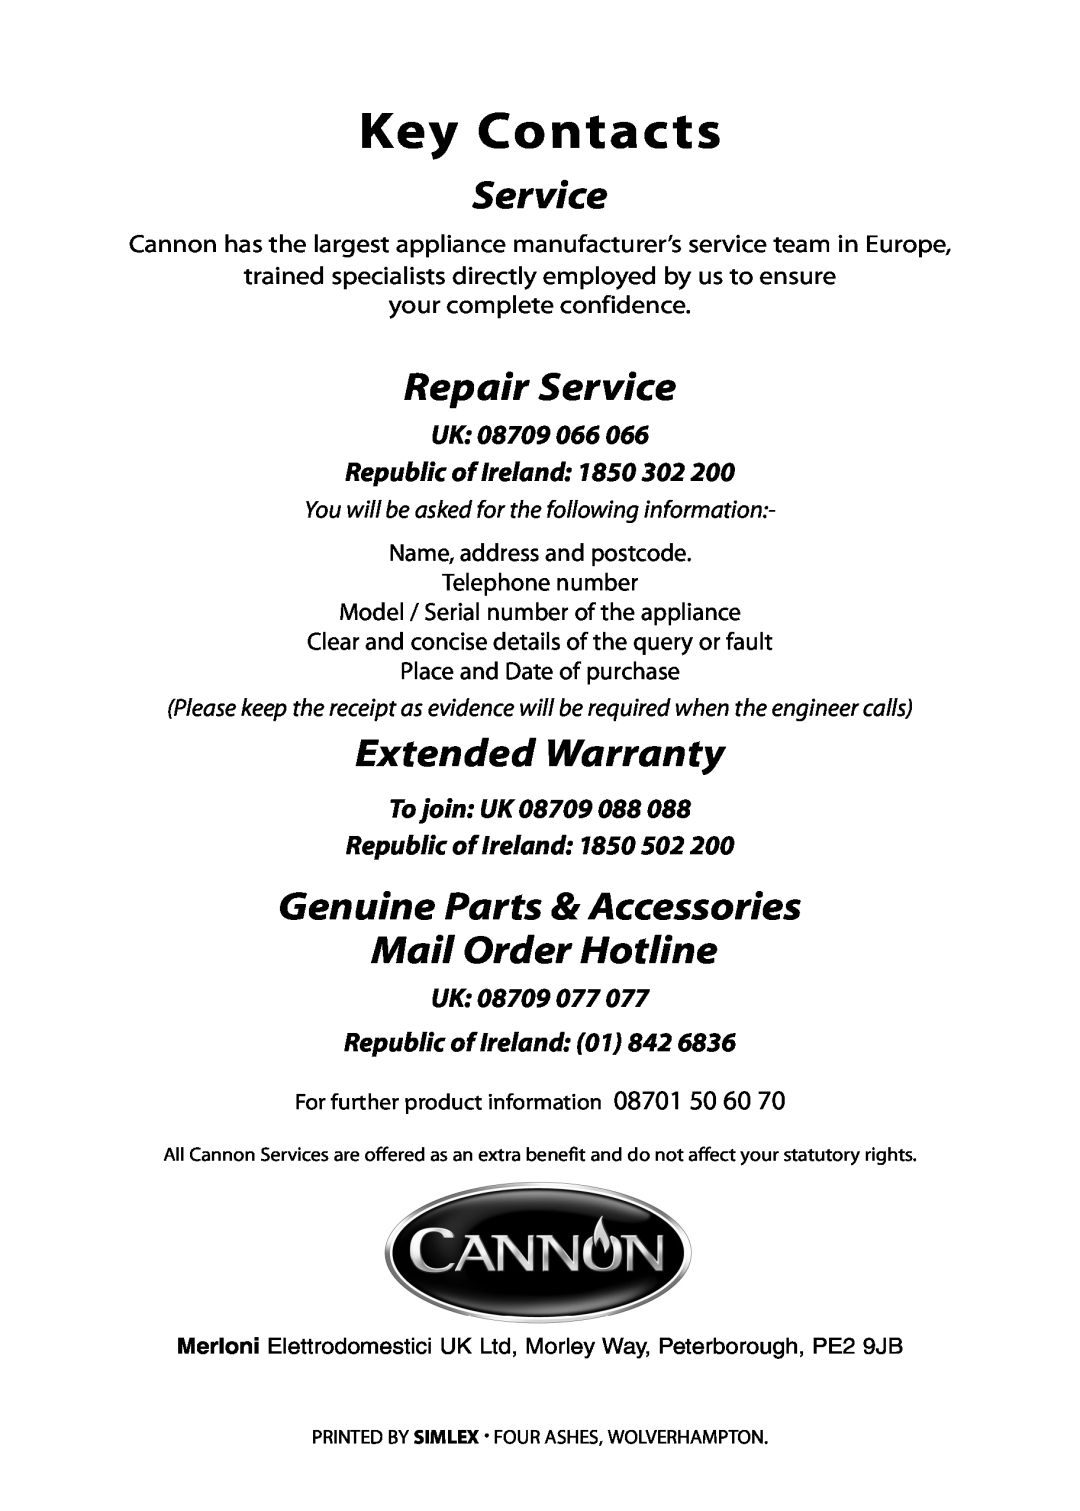 Cannon Professional 1000, 10455G Key Contacts, Repair Service, Extended Warranty, UK 08709 066 Republic of Ireland 